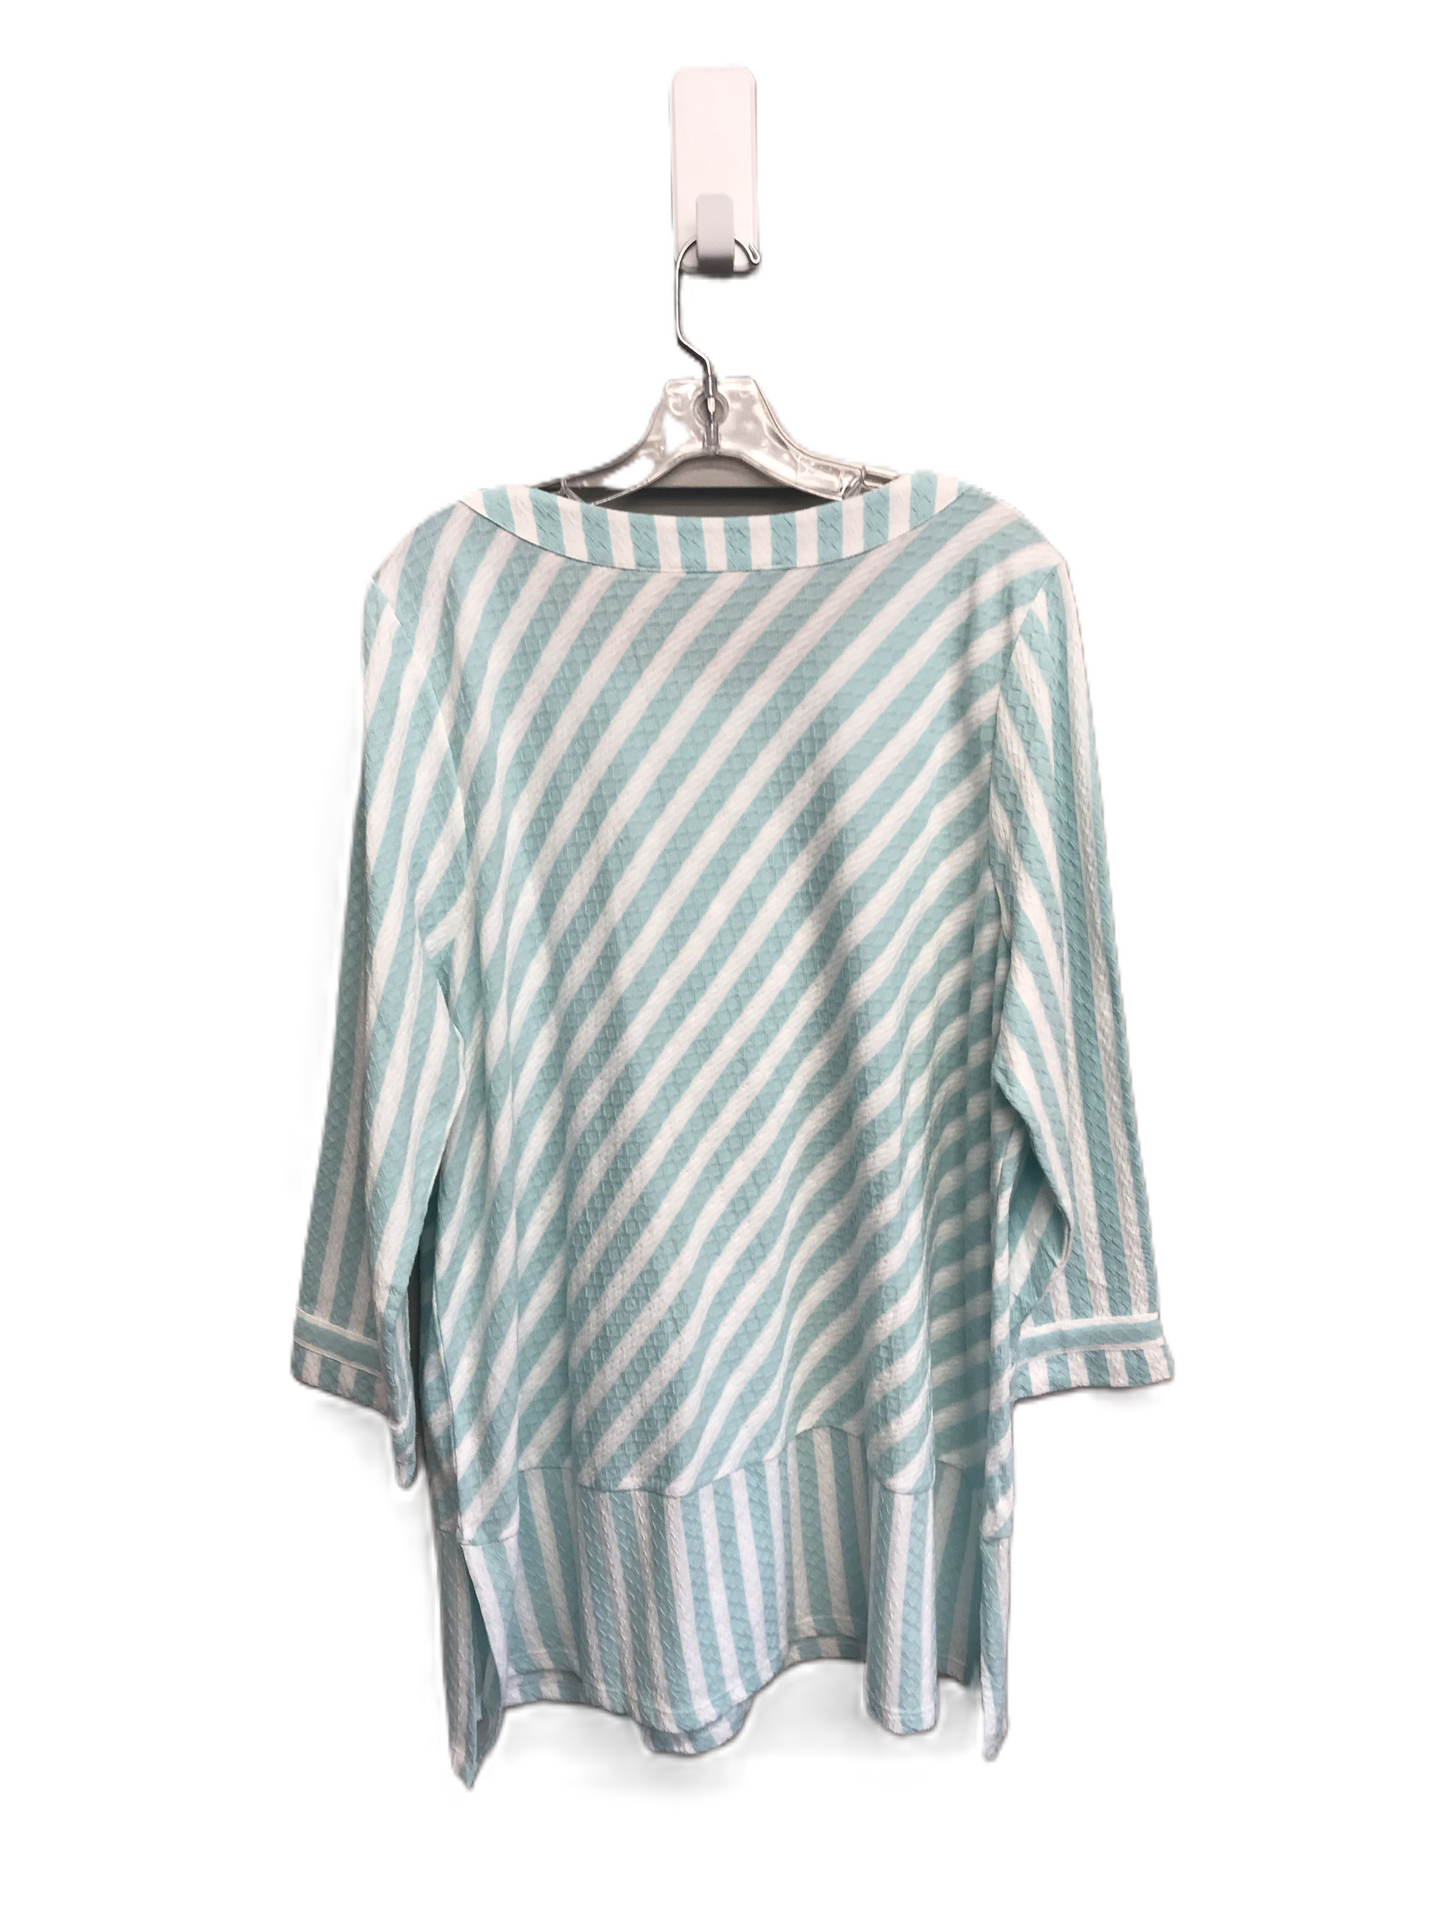 Striped Pattern Top Long Sleeve By Soft Surroundings, Size: 1x